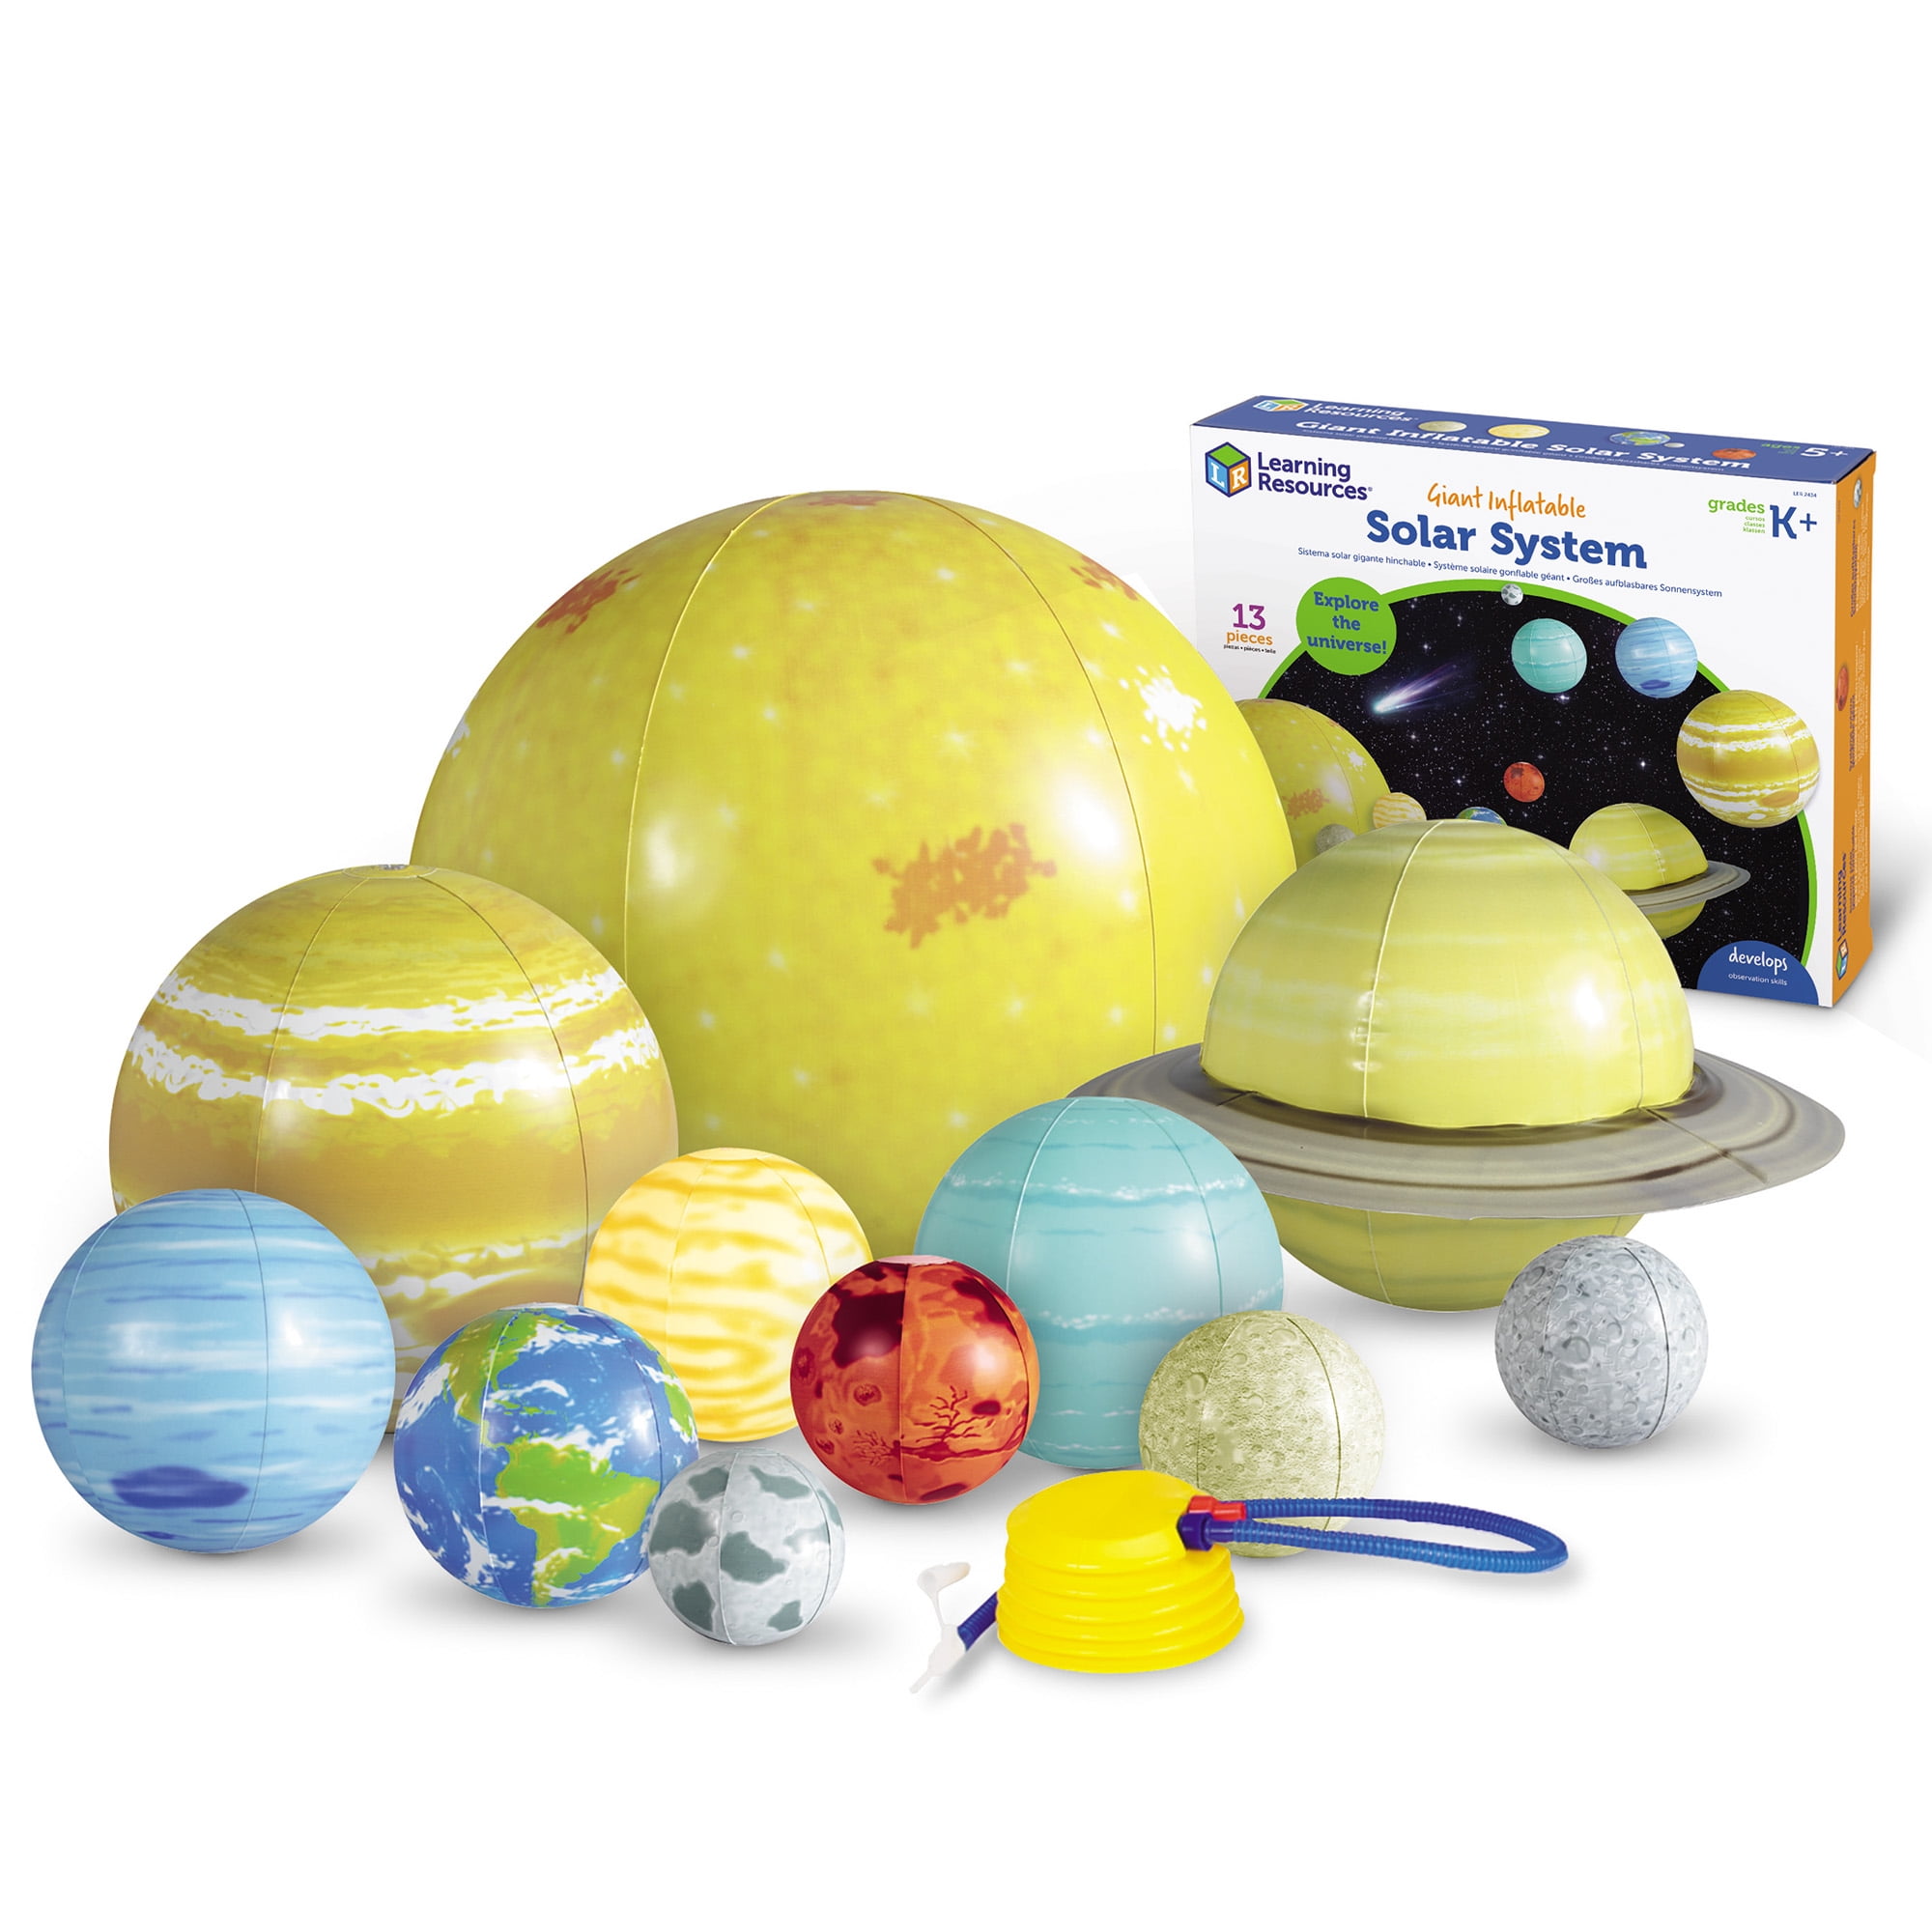 Learning Resources Giant Inflatable Solar System Set - 12 Pieces, Toys for  Kids Boys Girls Ages 5 6 7+ Years, STEM Science Kit, Educational Gift -  